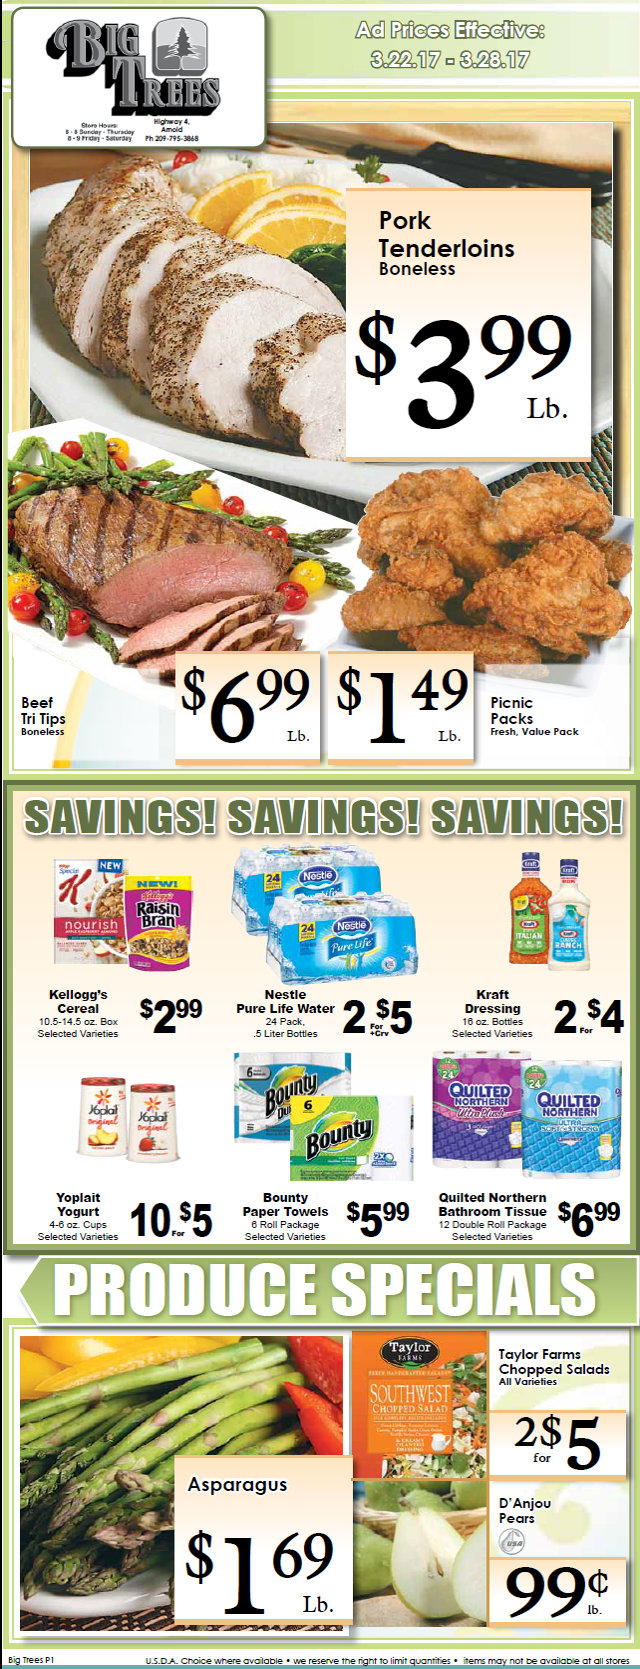 Big Trees Market Weekly Weekly Ad & Grocery Specials Through March 28th